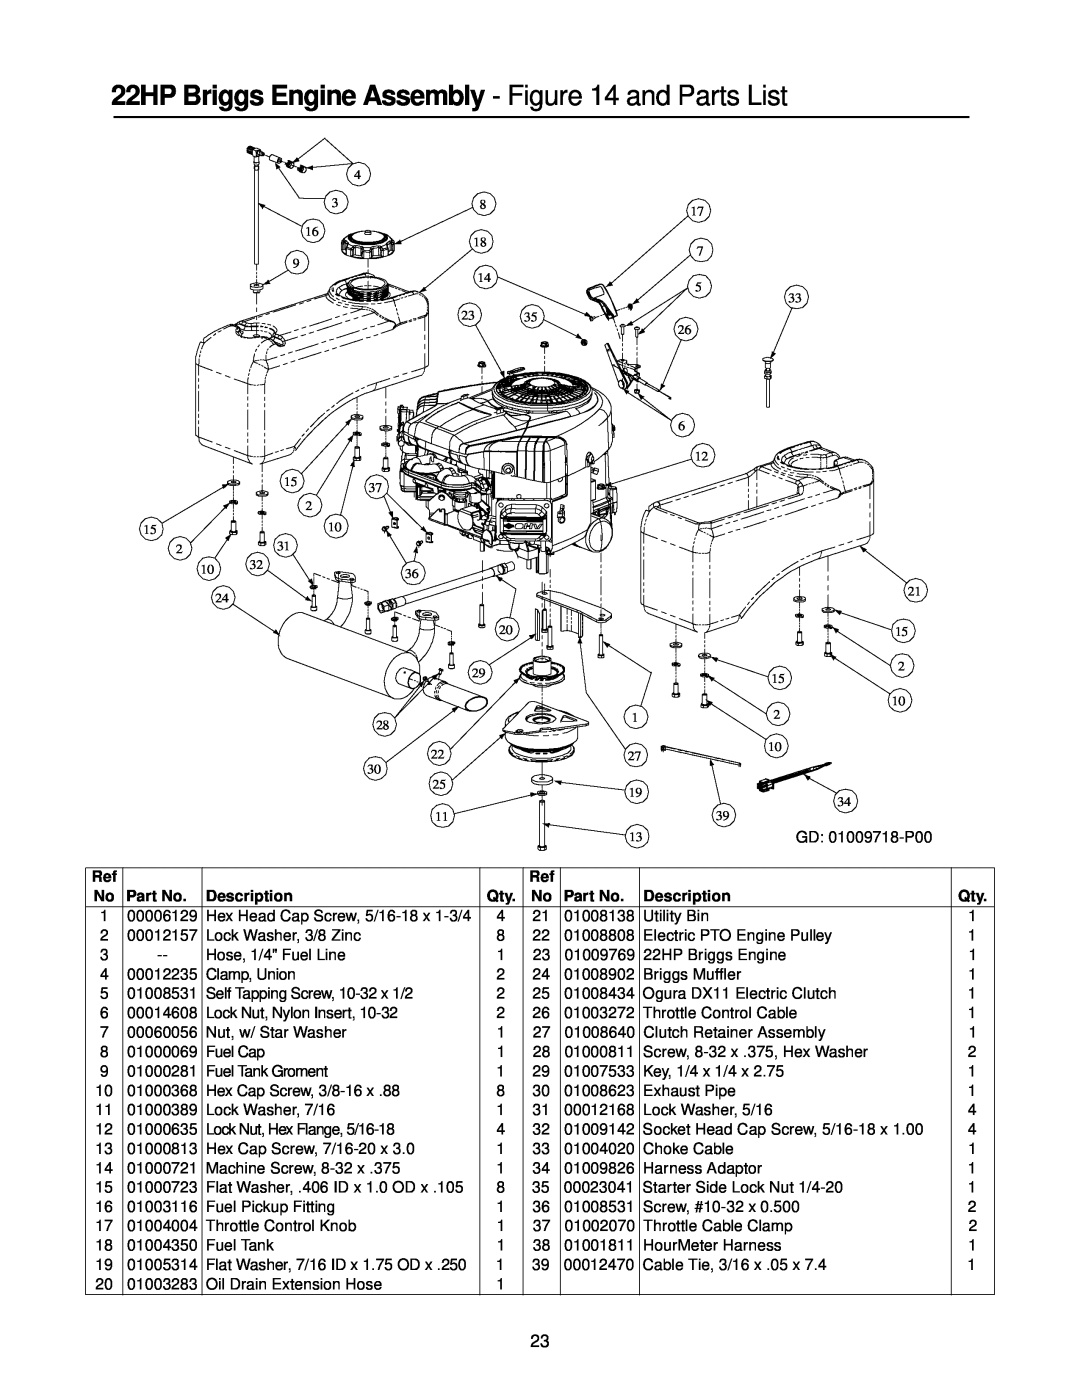 Cub Cadet 20HP Z-Force 44 manual 22HP Briggs Engine Assembly - and Parts List, Description 